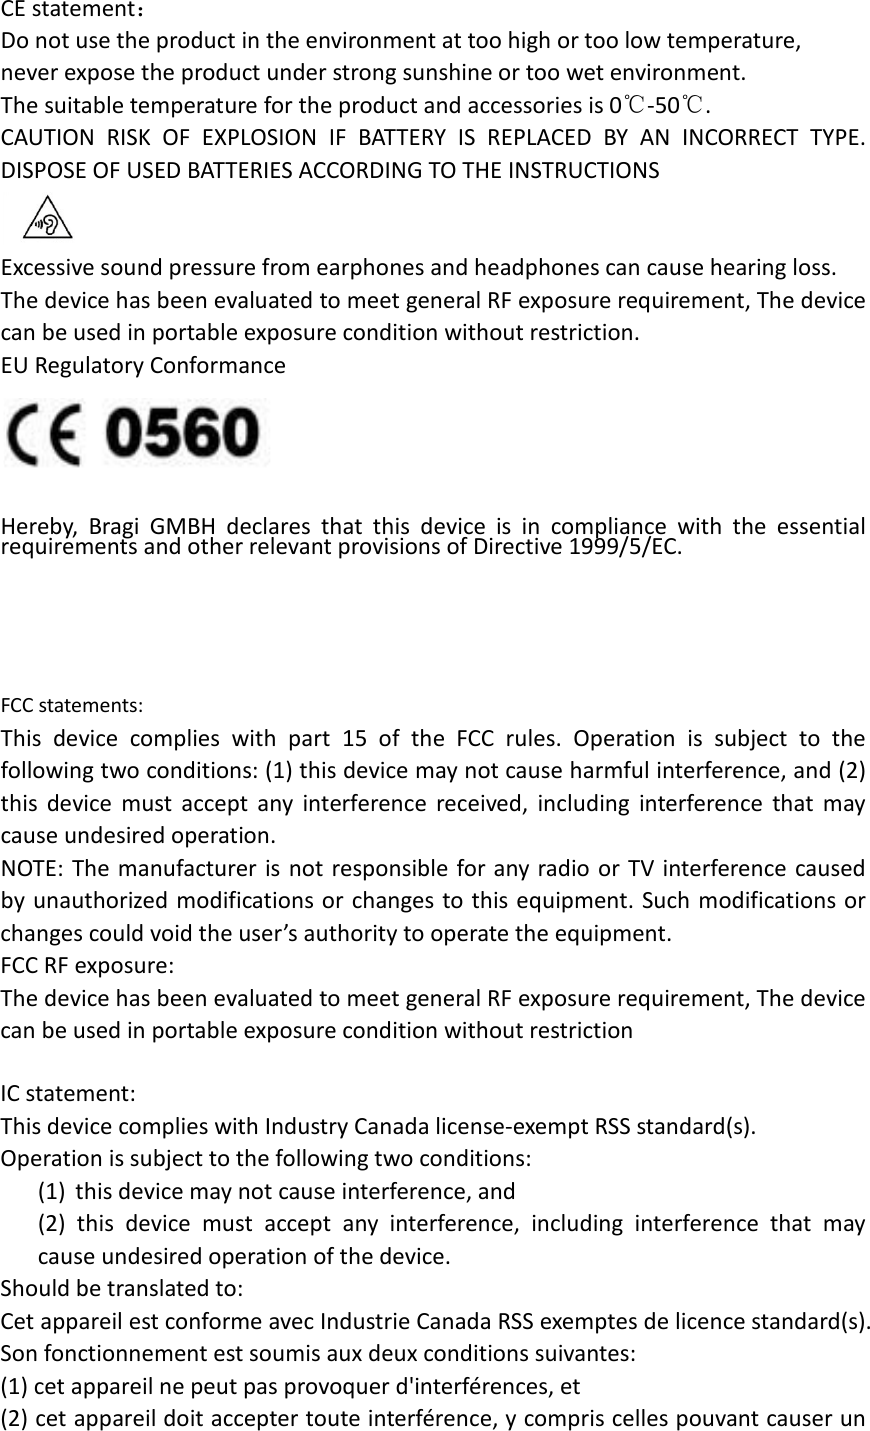 CE statement： Do not use the product in the environment at too high or too low temperature,   never expose the product under strong sunshine or too wet environment.   The suitable temperature for the product and accessories is 0℃-50℃. CAUTION RISK OF EXPLOSION IF BATTERY IS REPLACED BY AN INCORRECT TYPE. DISPOSE OF USED BATTERIES ACCORDING TO THE INSTRUCTIONS  Excessive sound pressure from earphones and headphones can cause hearing loss. The device has been evaluated to meet general RF exposure requirement, The device can be used in portable exposure condition without restriction. EU Regulatory Conformance   Hereby, Bragi GMBH declares that this device  is in compliance with the essential requirements and other relevant provisions of Directive 1999/5/EC.     FCC statements: This device complies with part 15 of the FCC rules. Operation is subject to the following two conditions: (1) this device may not cause harmful interference, and (2) this device must accept any interference received, including interference that may cause undesired operation.  NOTE: The manufacturer is not responsible for any radio or TV interference caused by unauthorized modifications or changes to this equipment. Such modifications or changes could void the user’s authority to operate the equipment. FCC RF exposure: The device has been evaluated to meet general RF exposure requirement, The device can be used in portable exposure condition without restriction      IC statement: This device complies with Industry Canada license-exempt RSS standard(s). Operation is subject to the following two conditions: (1) this device may not cause interference, and (2) this device must accept any interference, including interference that may cause undesired operation of the device. Should be translated to: Cet appareil est conforme avec Industrie Canada RSS exemptes de licence standard(s).   Son fonctionnement est soumis aux deux conditions suivantes:   (1) cet appareil ne peut pas provoquer d&apos;interférences, et   (2) cet appareil doit accepter toute interférence, y compris celles pouvant causer un 